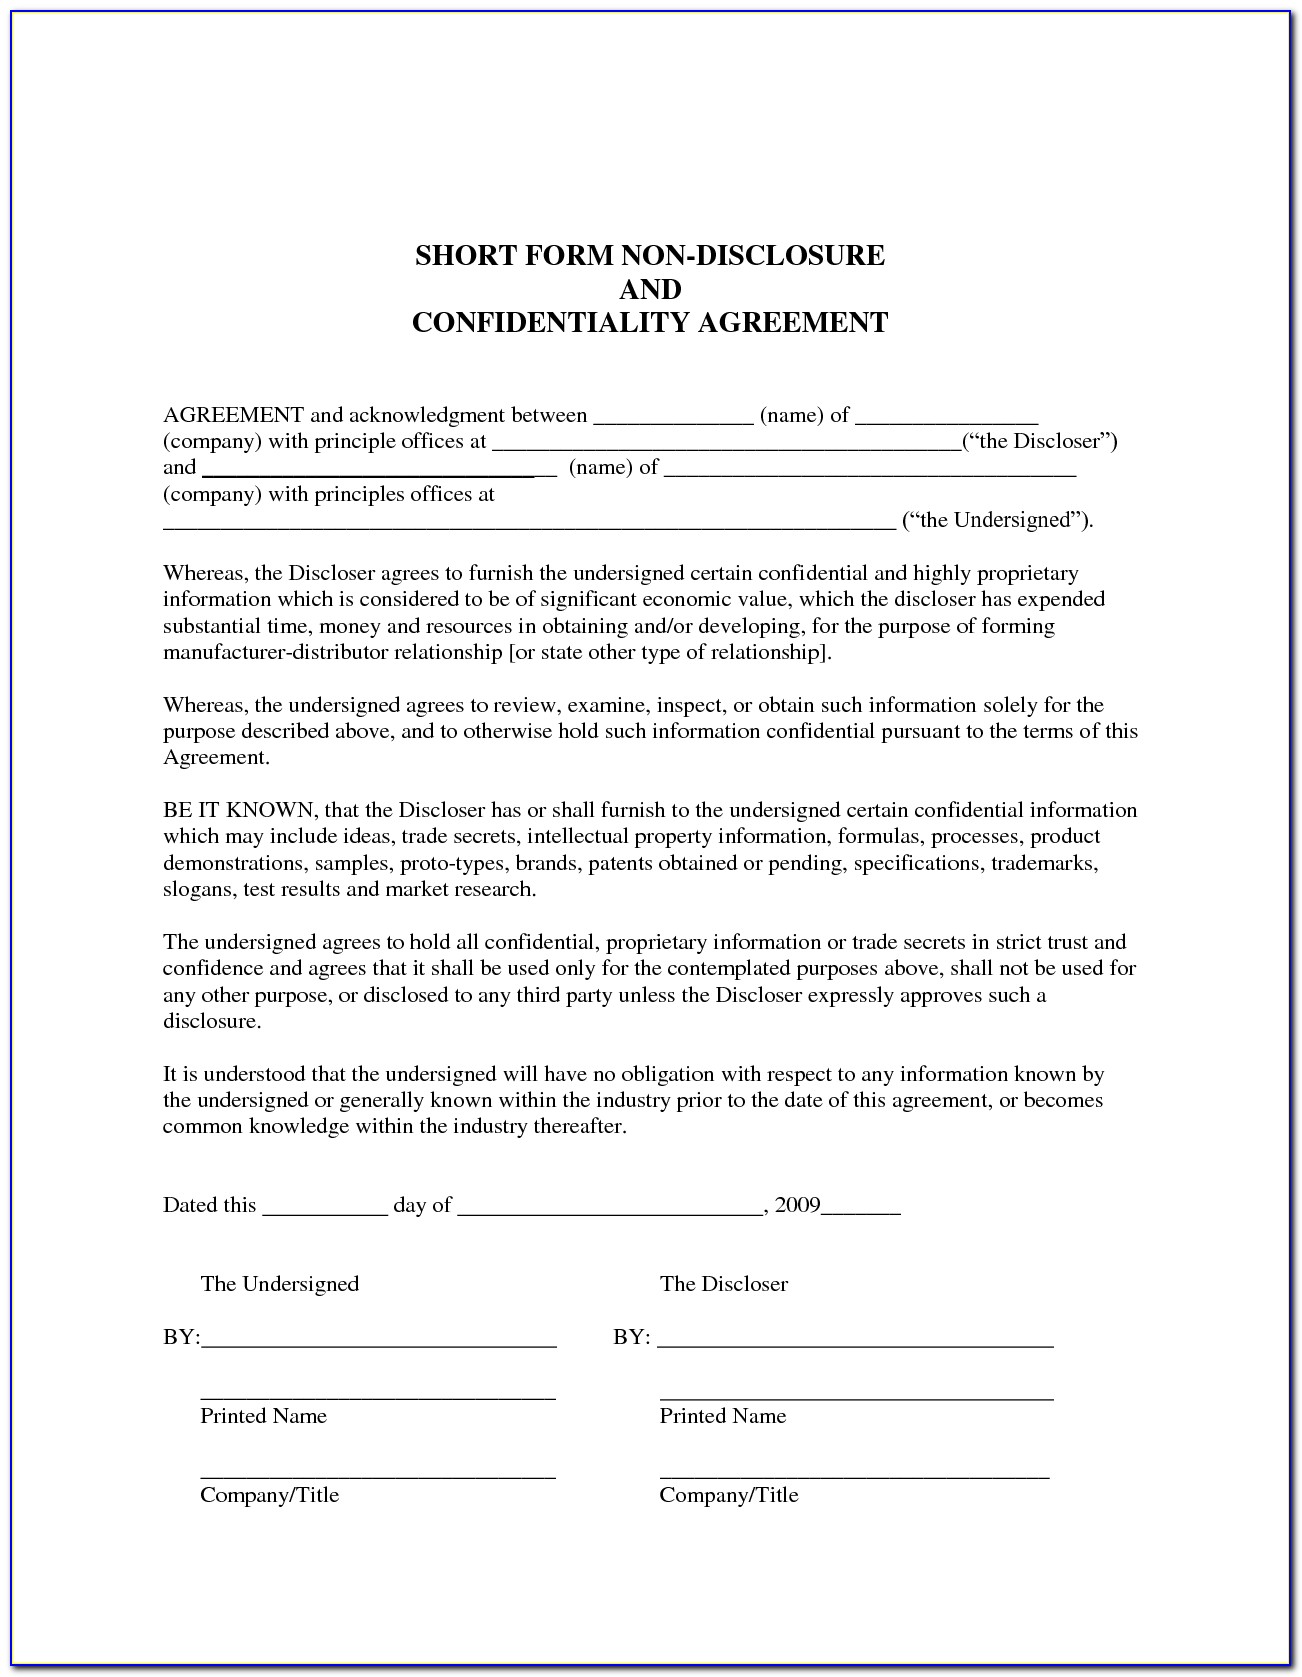 Confidentiality Agreement Forms Free